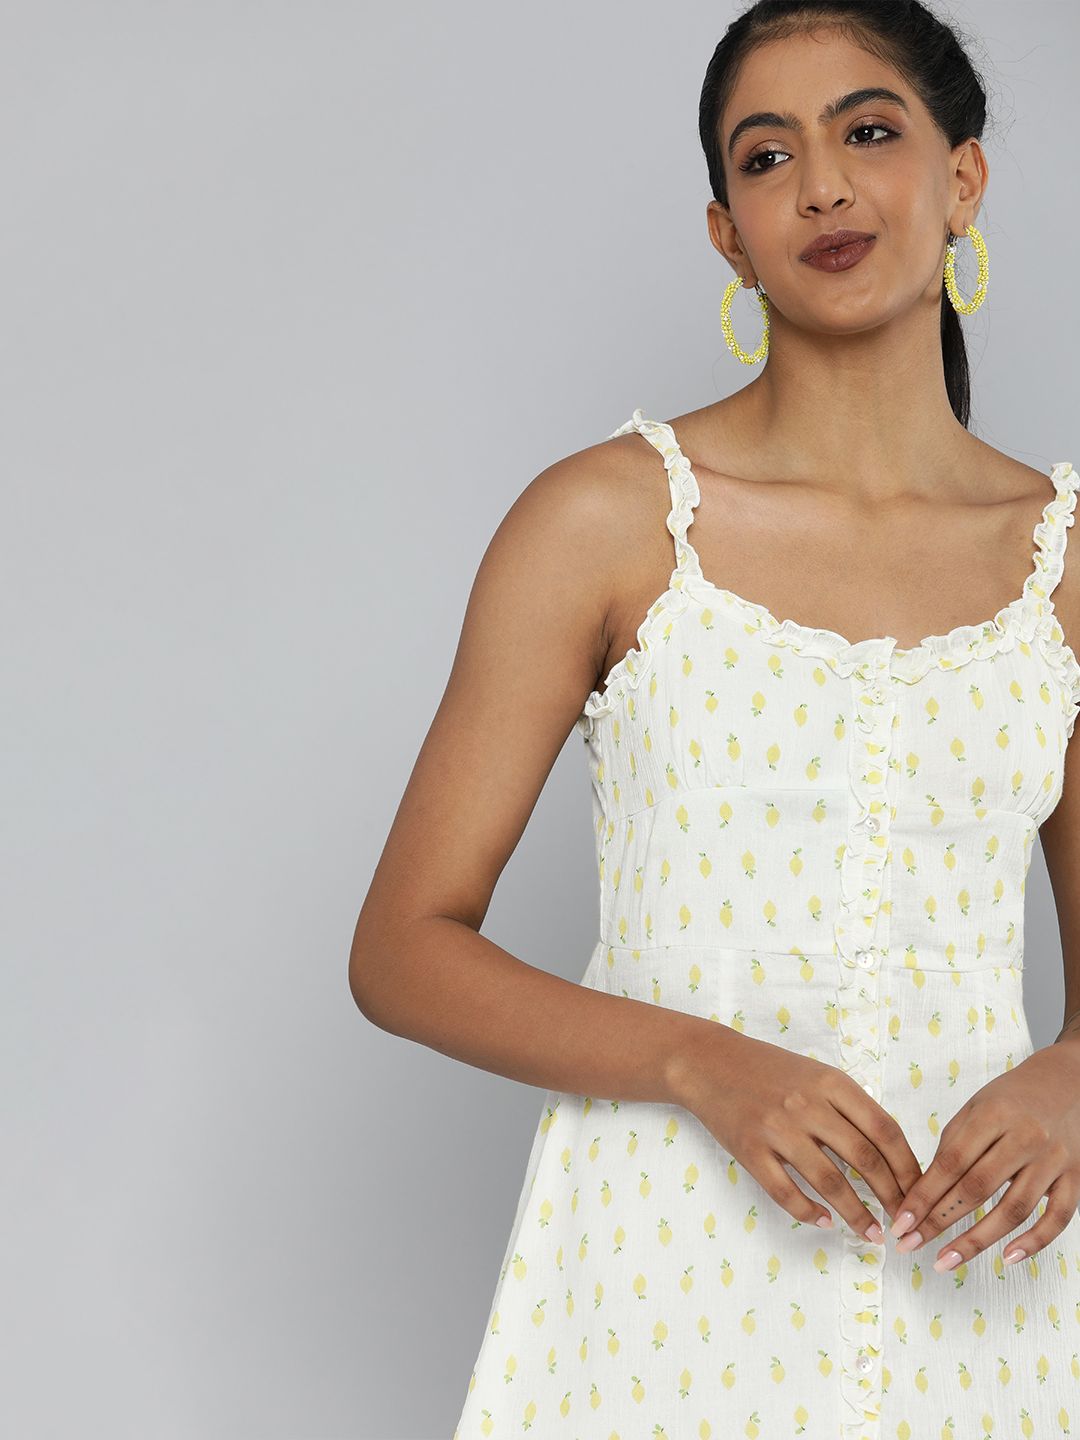 MAGRE White & Yellow Floral A-Line Mini Dress Price in India